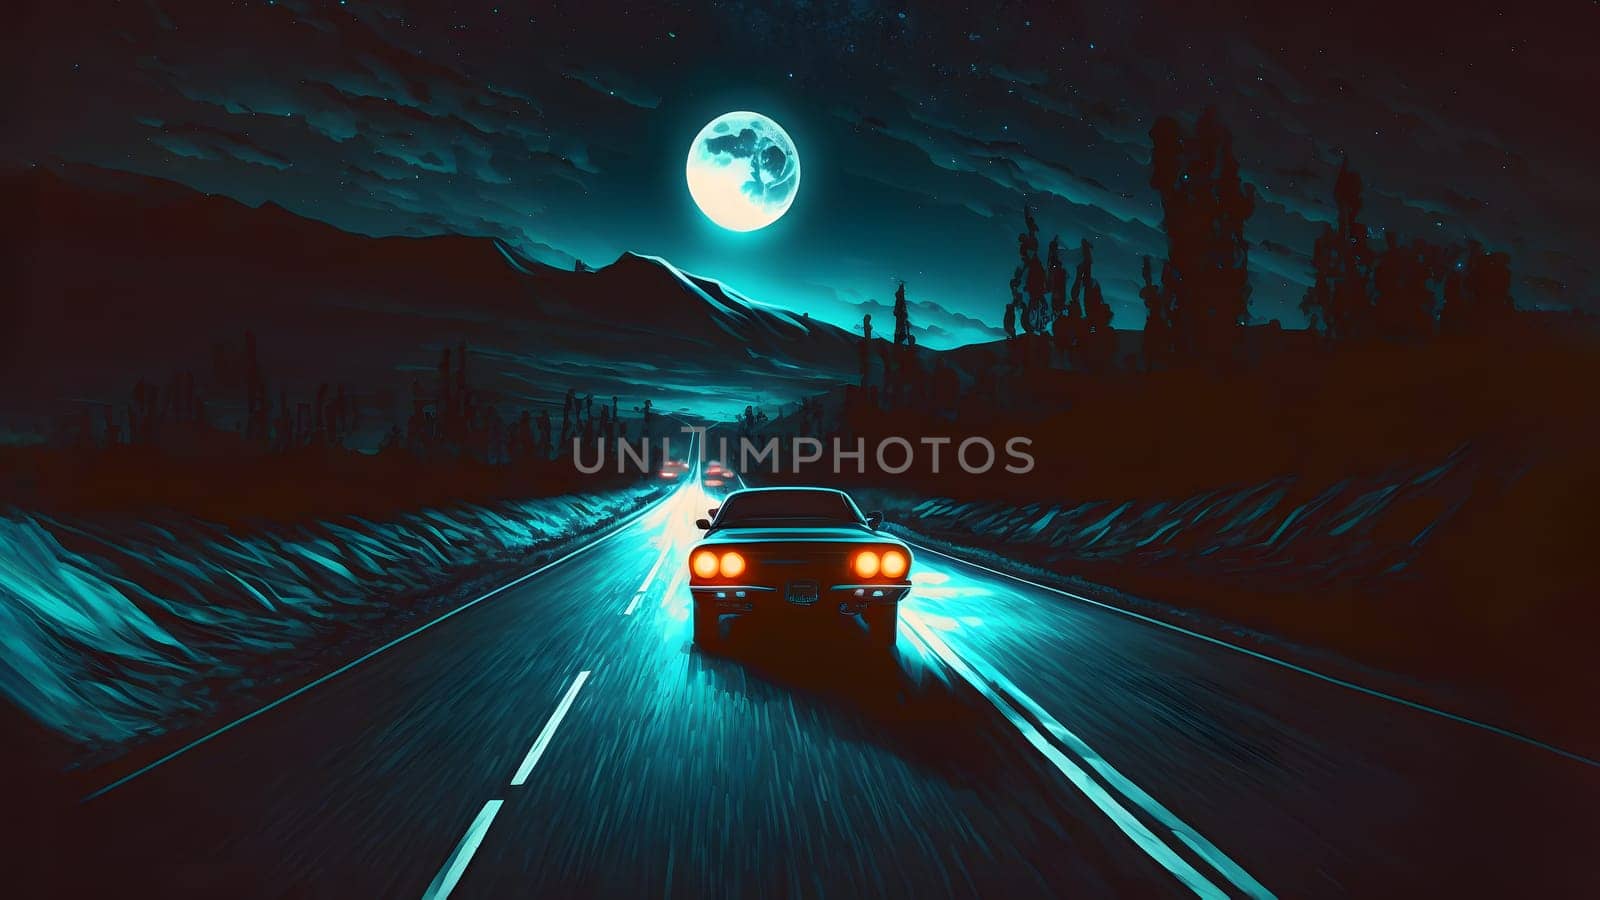 alone car on dark full moon night road in wilderness with forest on sides and mountains on the horizon, neural network generated art by z1b